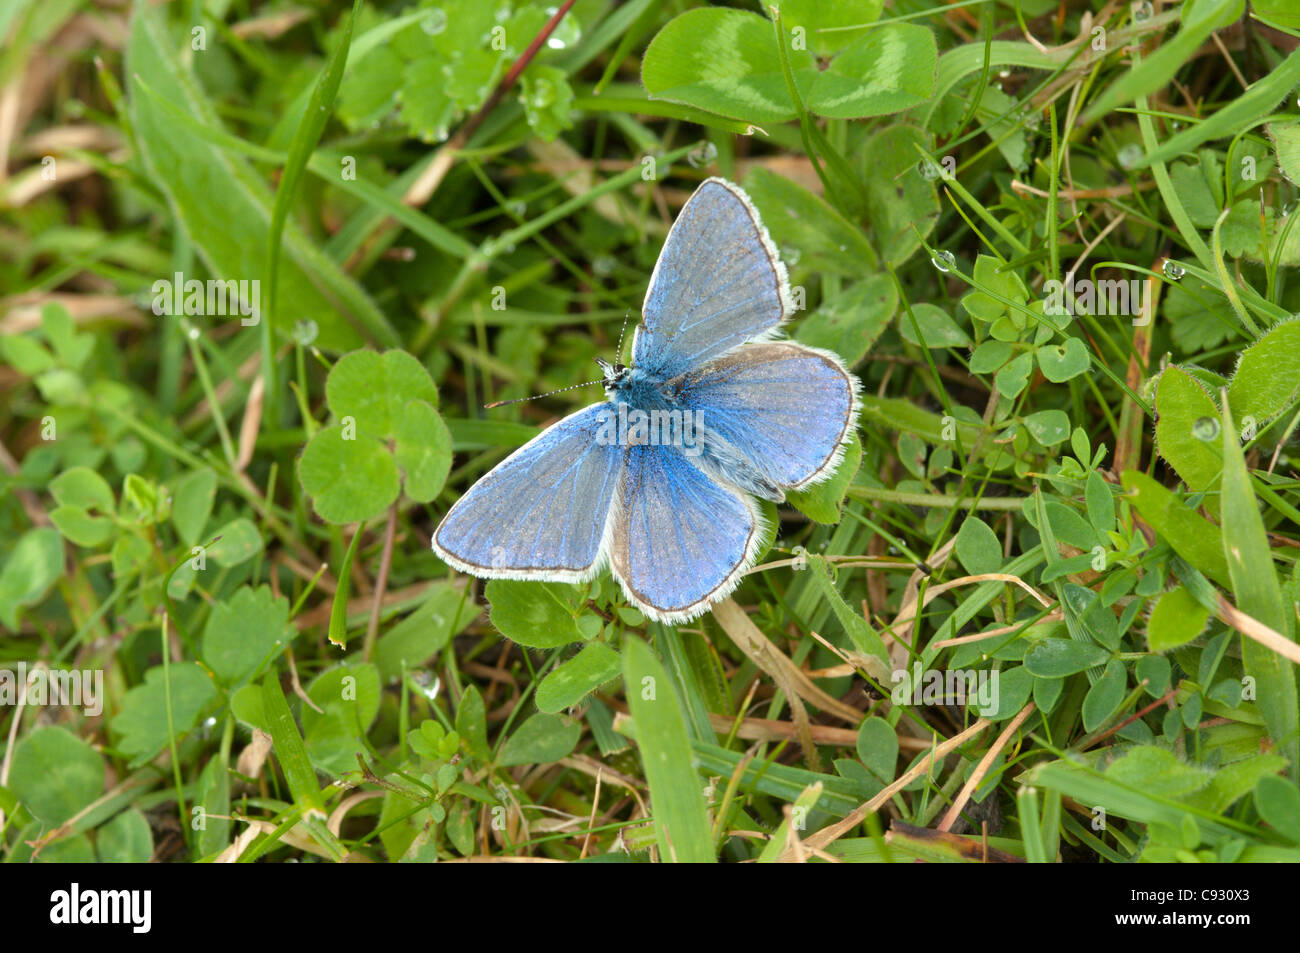 The Common blue butterfly Polyommatus icarus is found in the southern counties of England in the summer months. The male is a Stock Photo